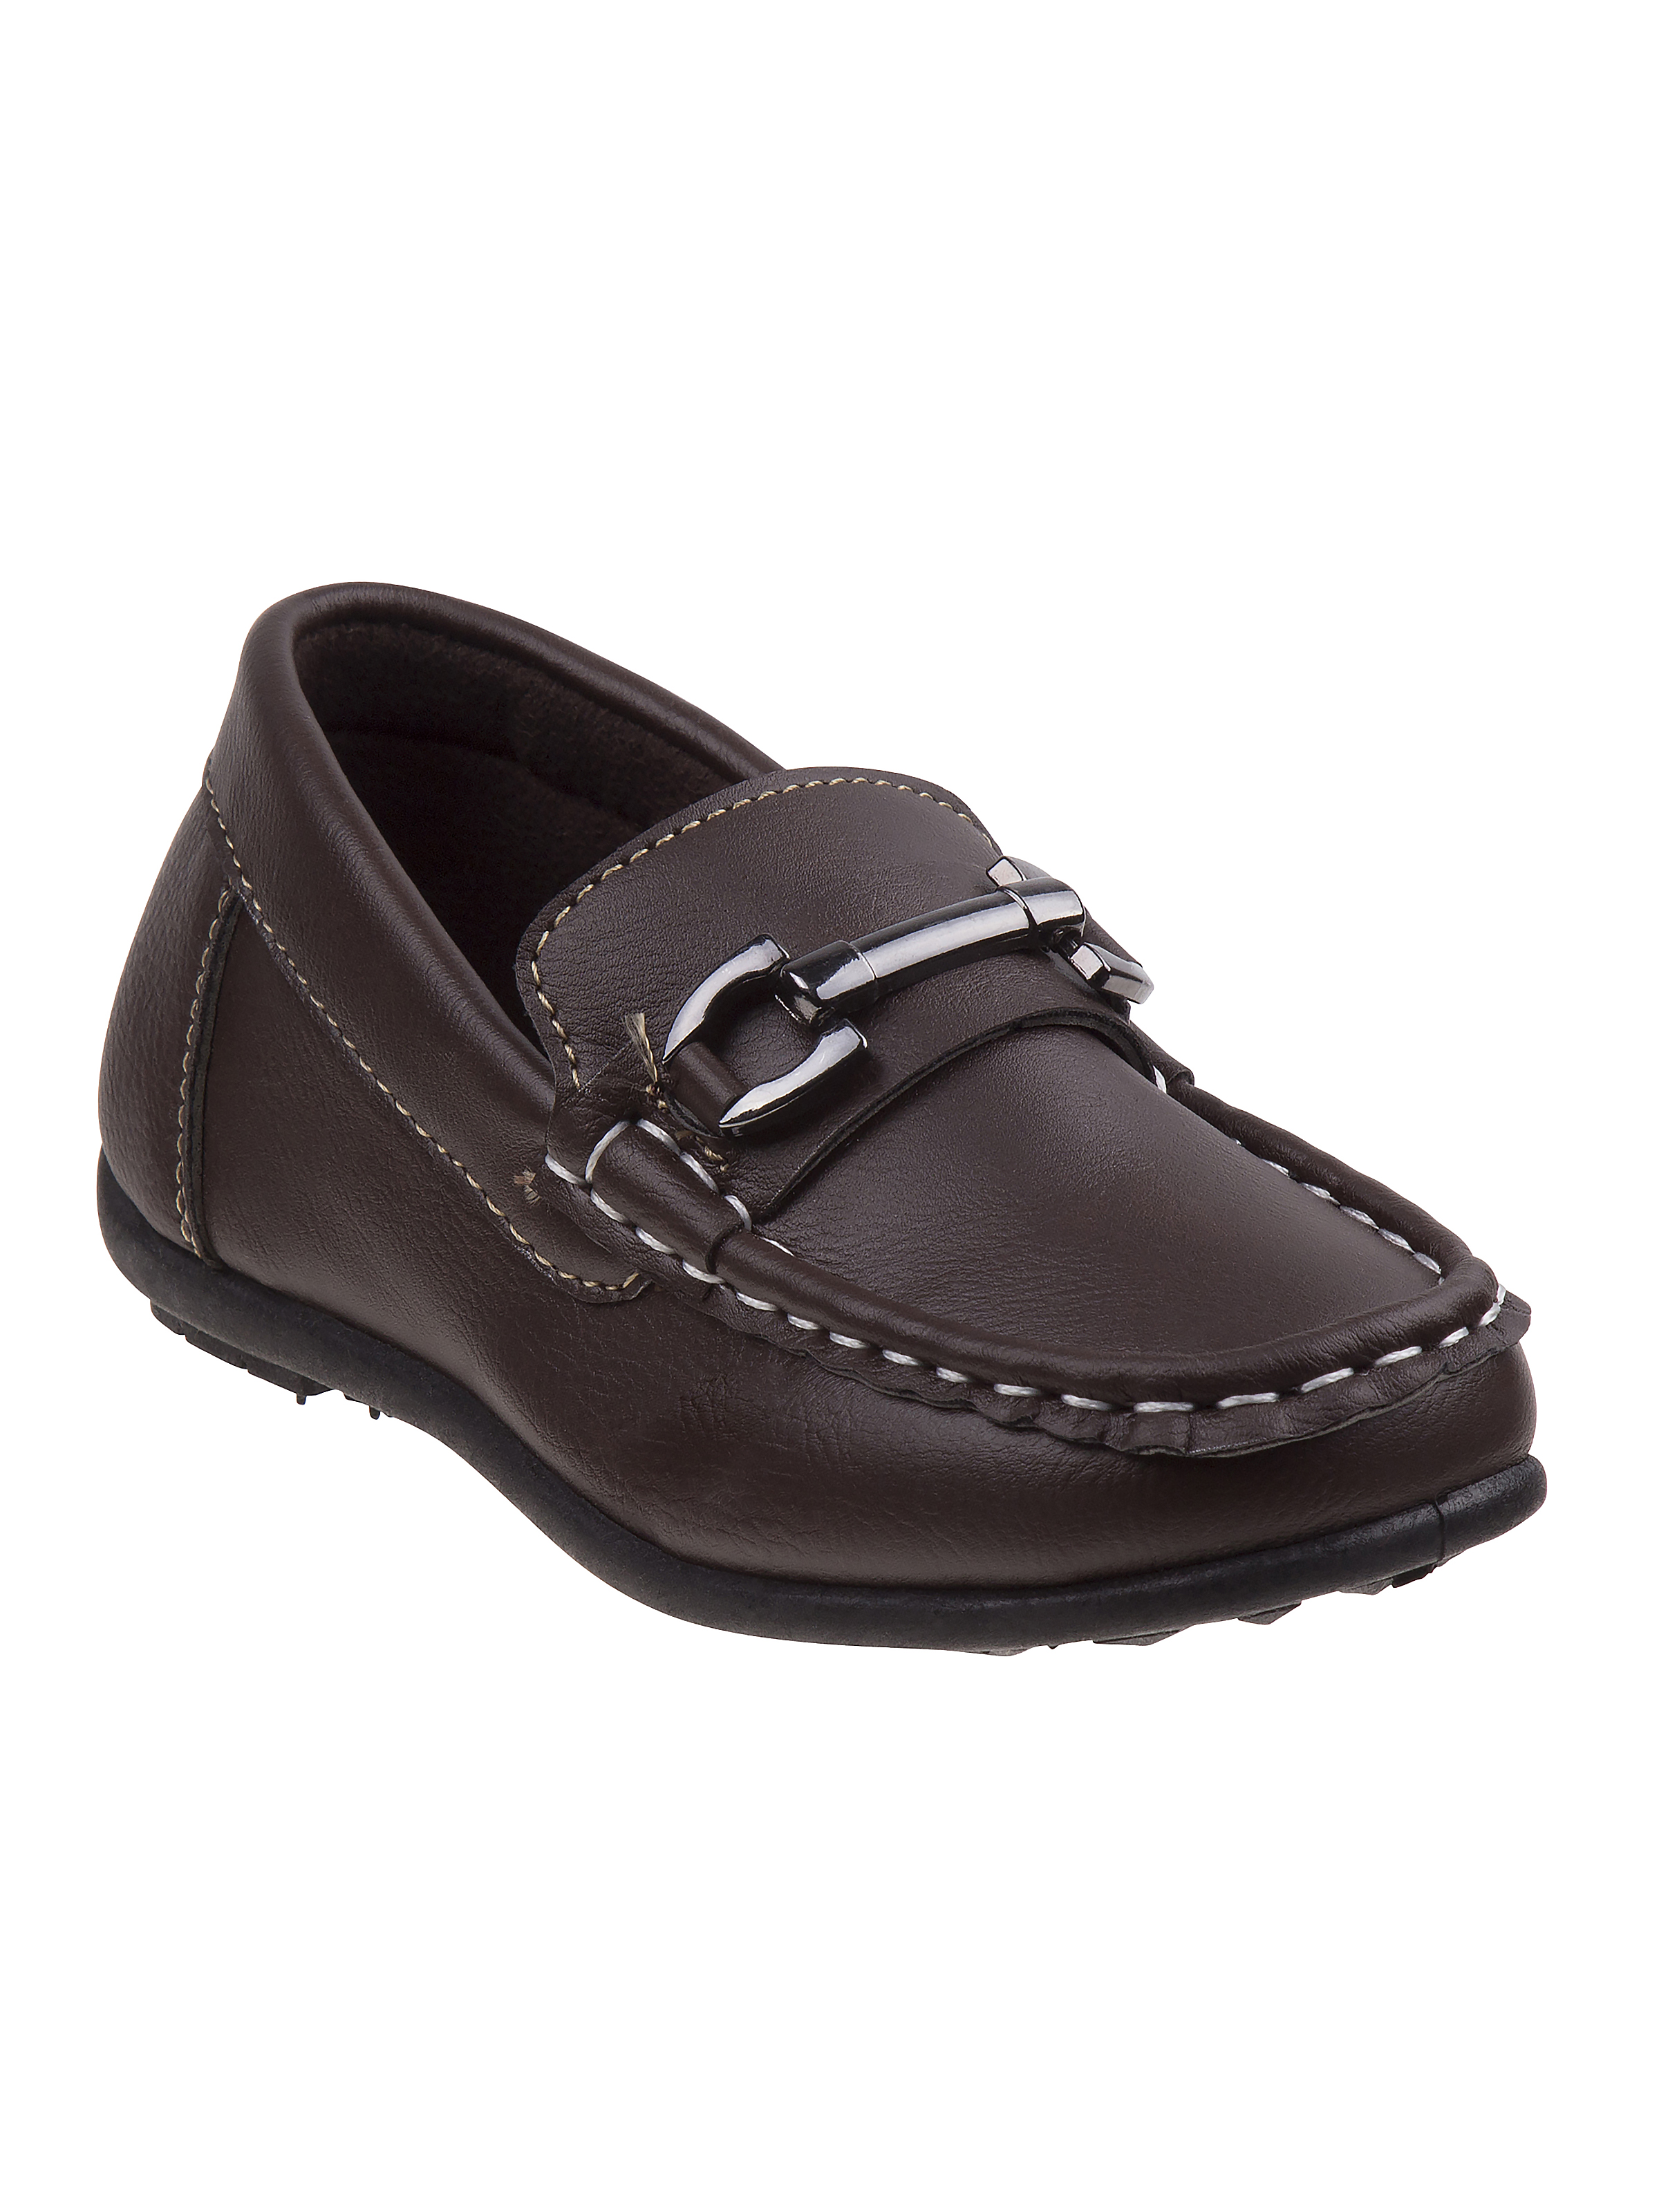 Josmo Boys Slip On Casual Shoes. (Little Kids/Big Kids) - image 1 of 5